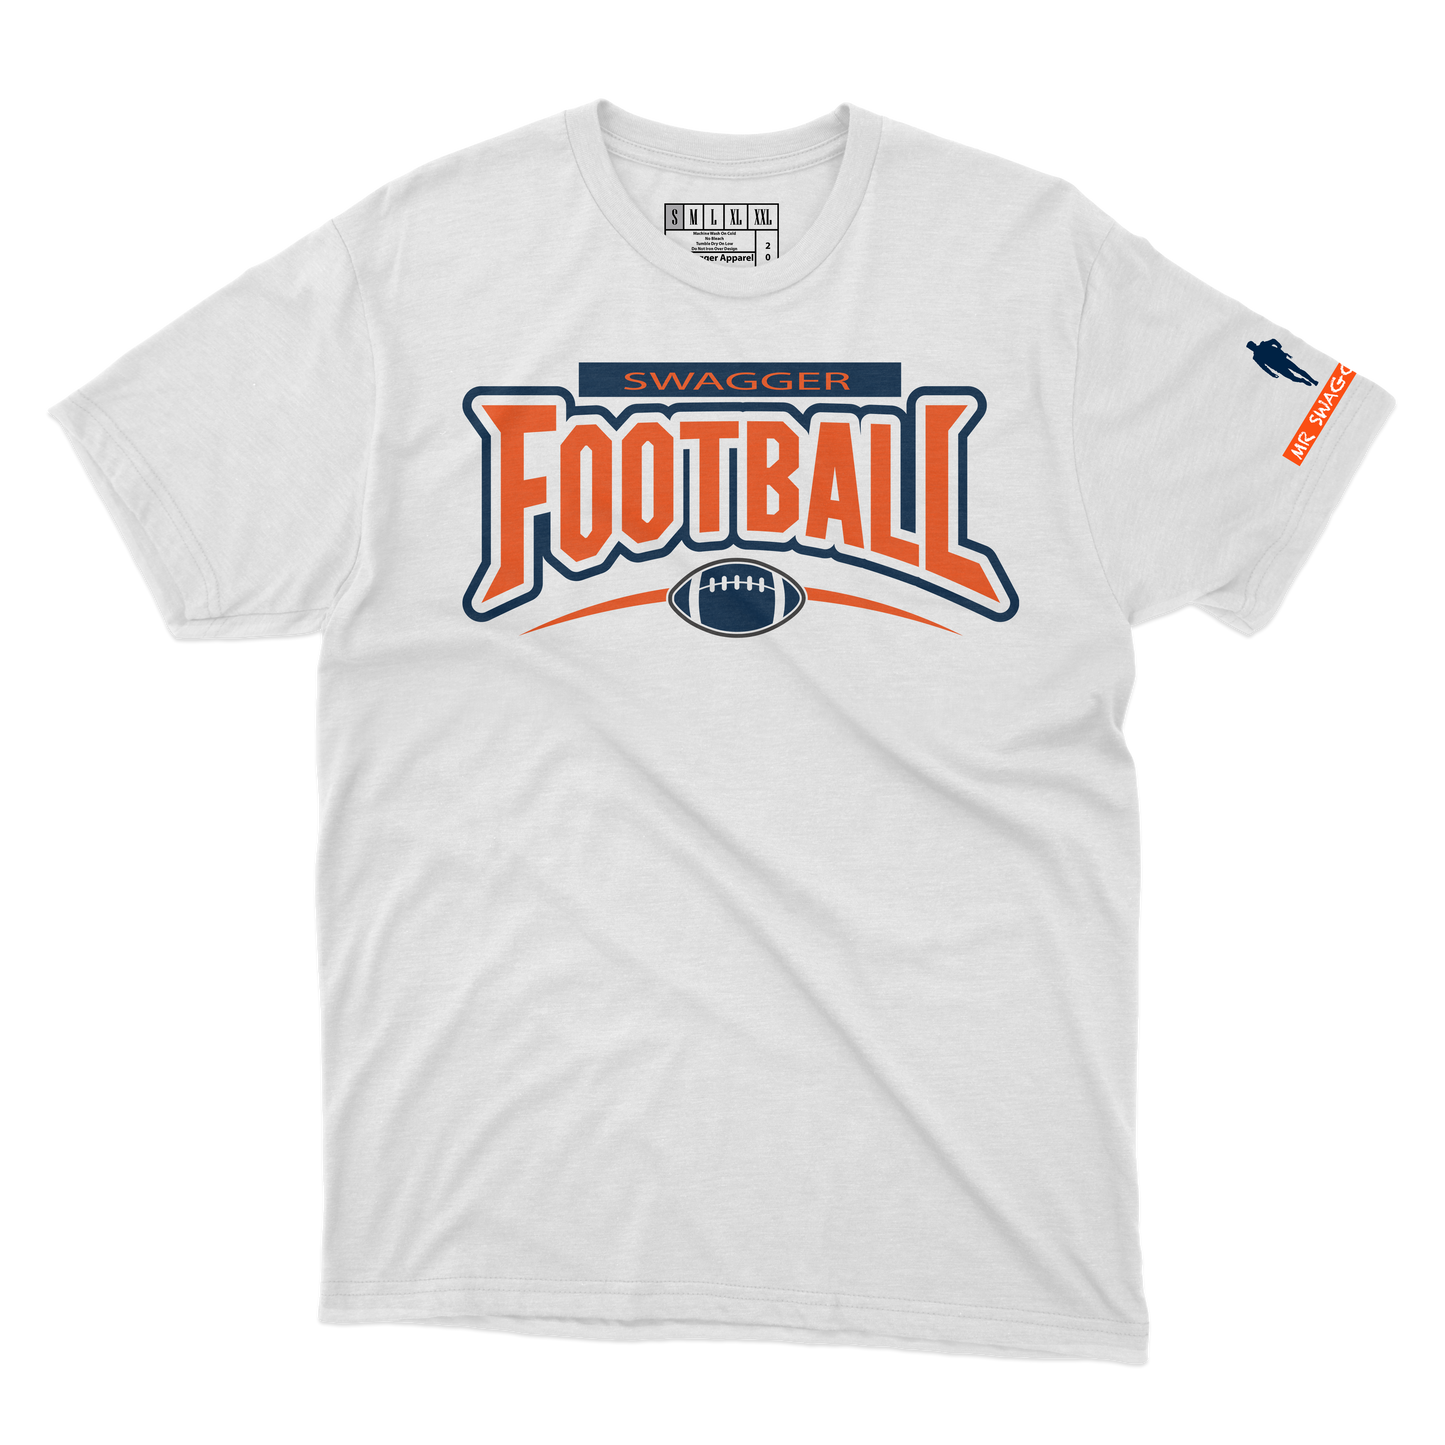 Mr Swagger Football Tee White